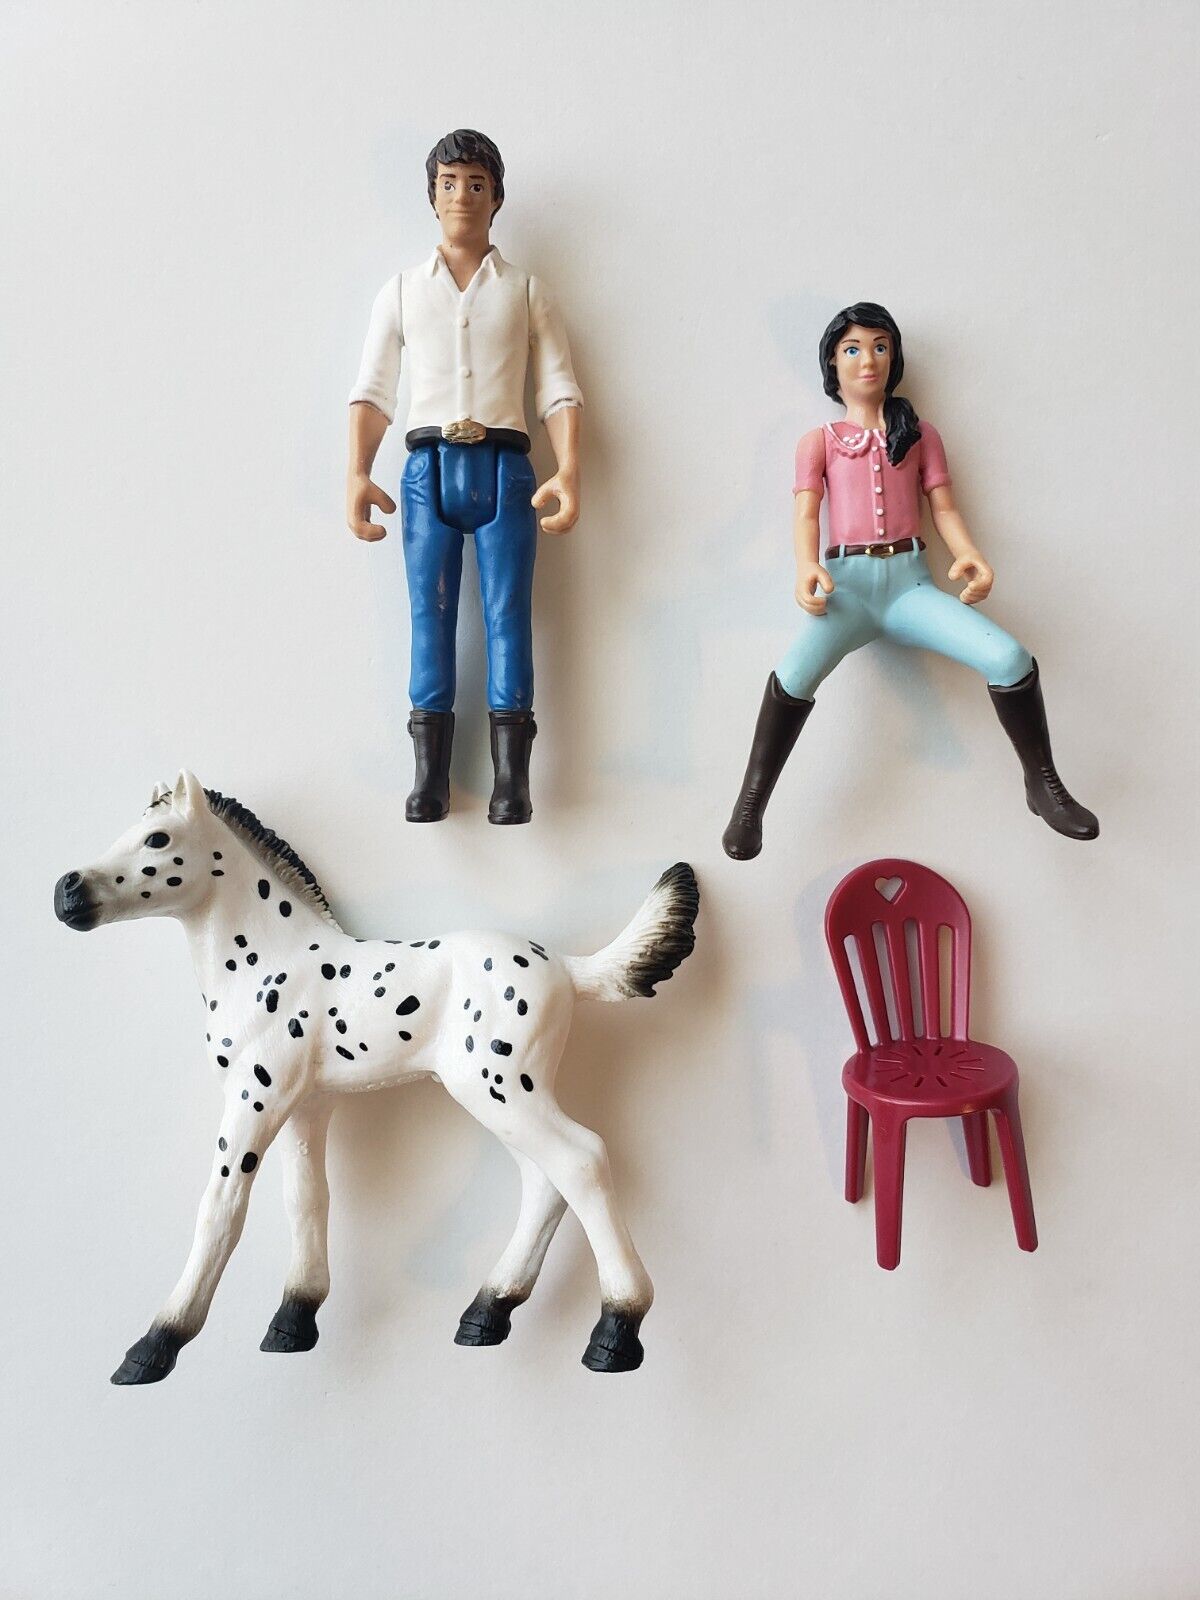 Schleich Appaloosa Foal Spotted Horse - Girl Rider - Man Trainer - CAFE Chair